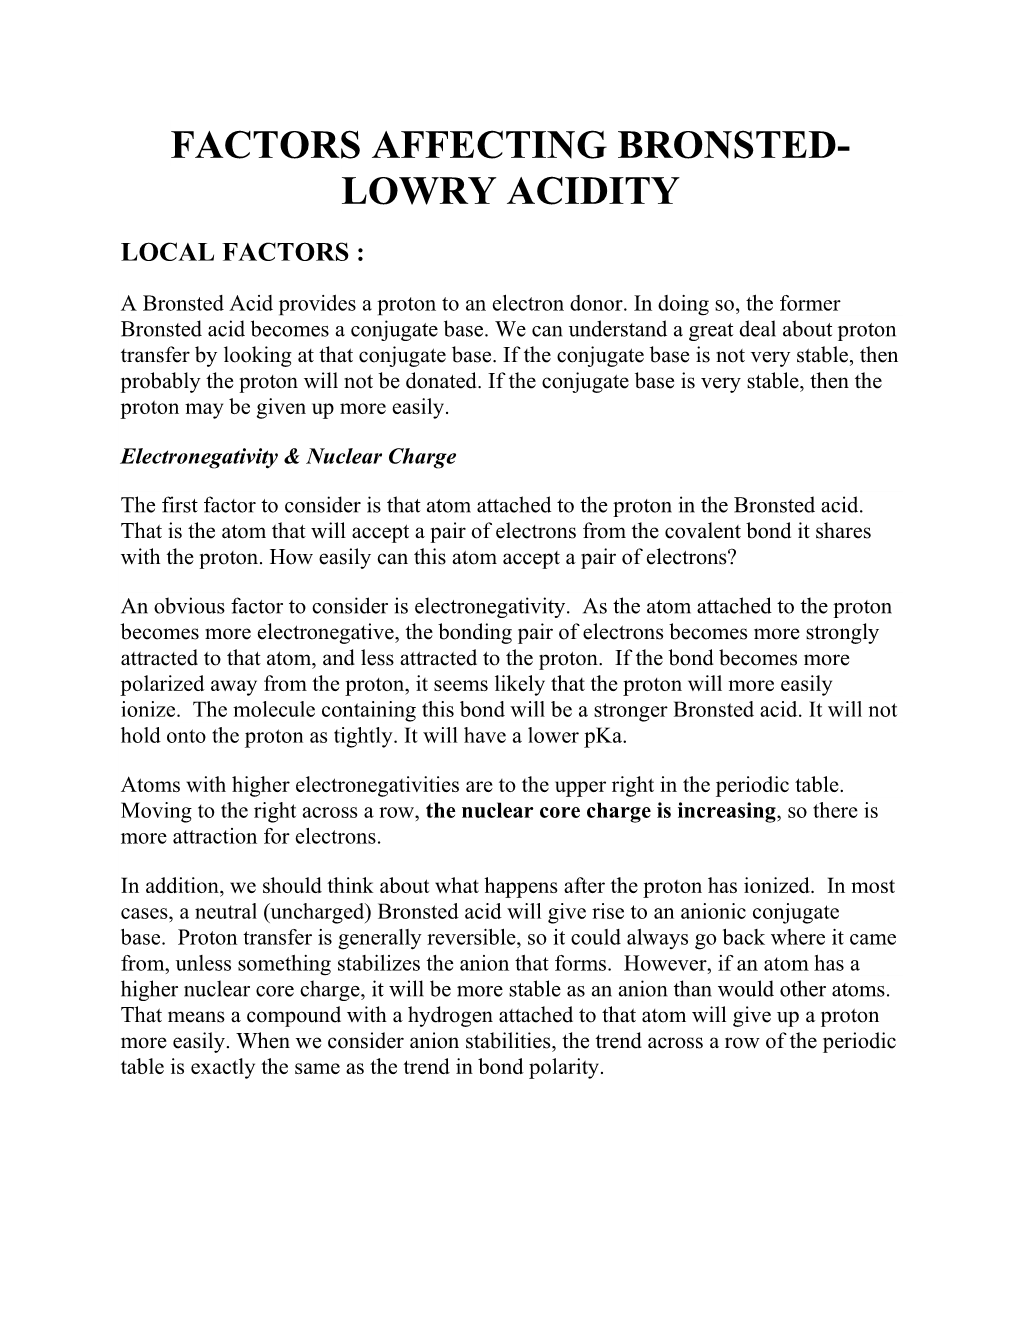 Factors Affecting Bronsted- Lowry Acidity Local Factors